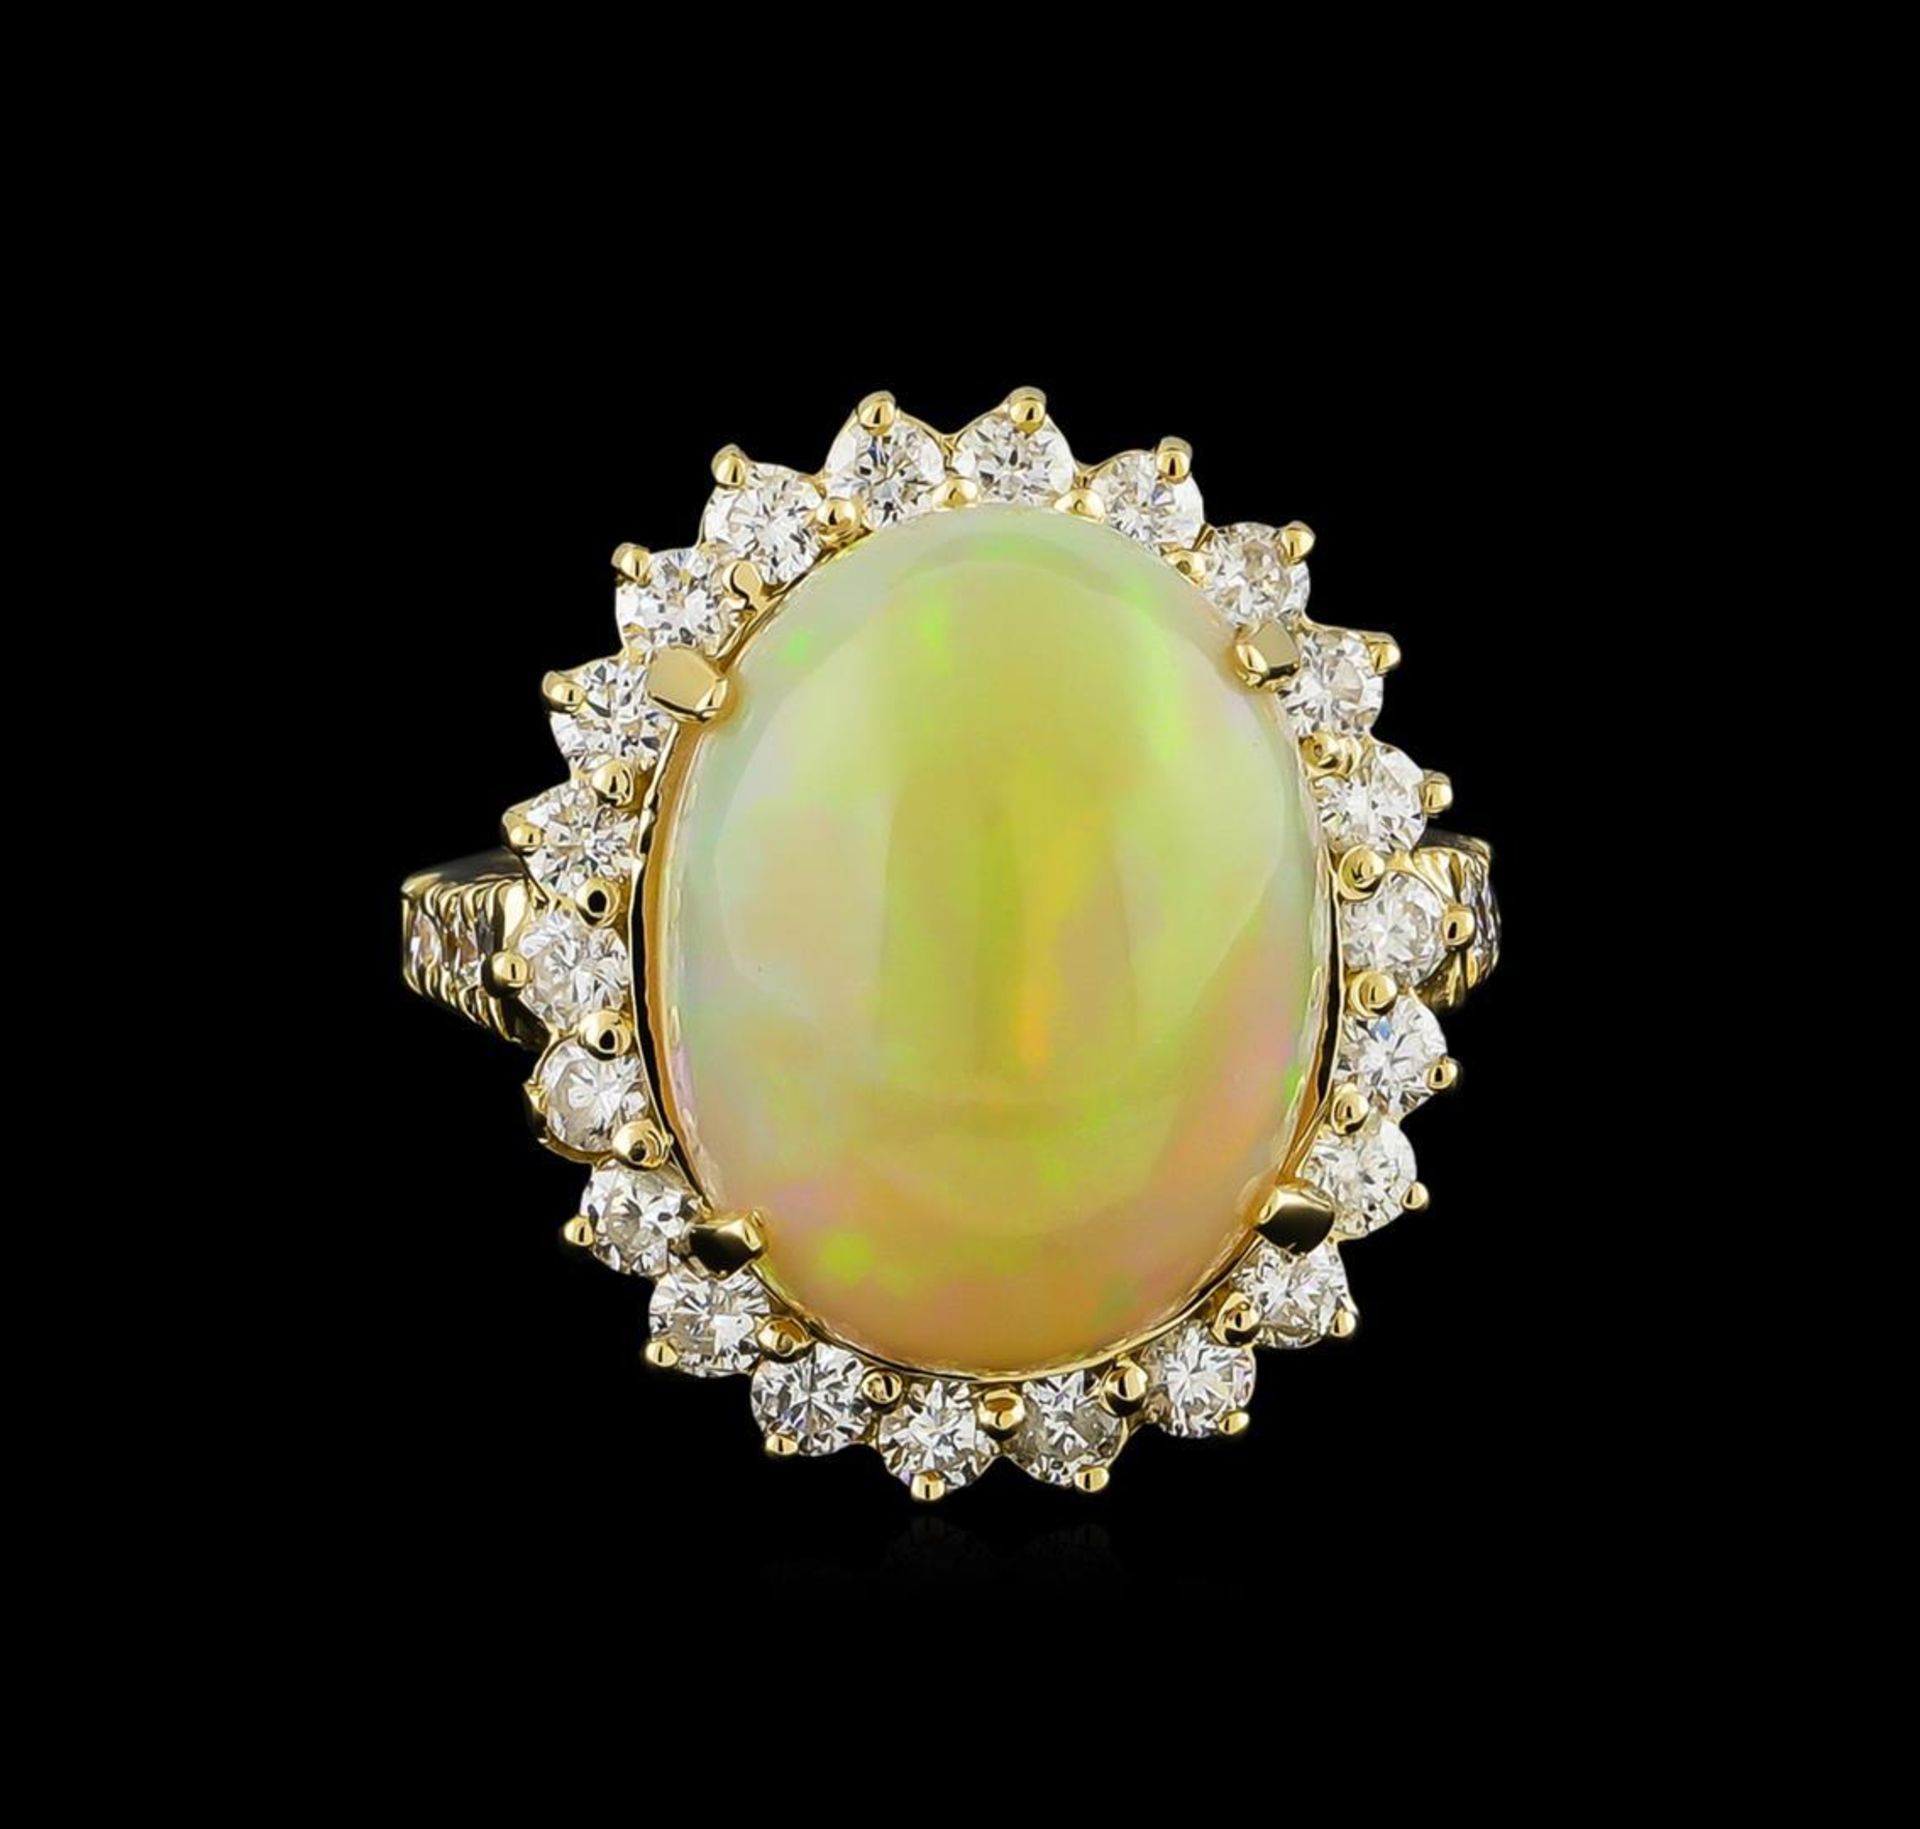 11.30 ctw Opal and Diamond Ring - 14KT Yellow Gold - Image 2 of 5